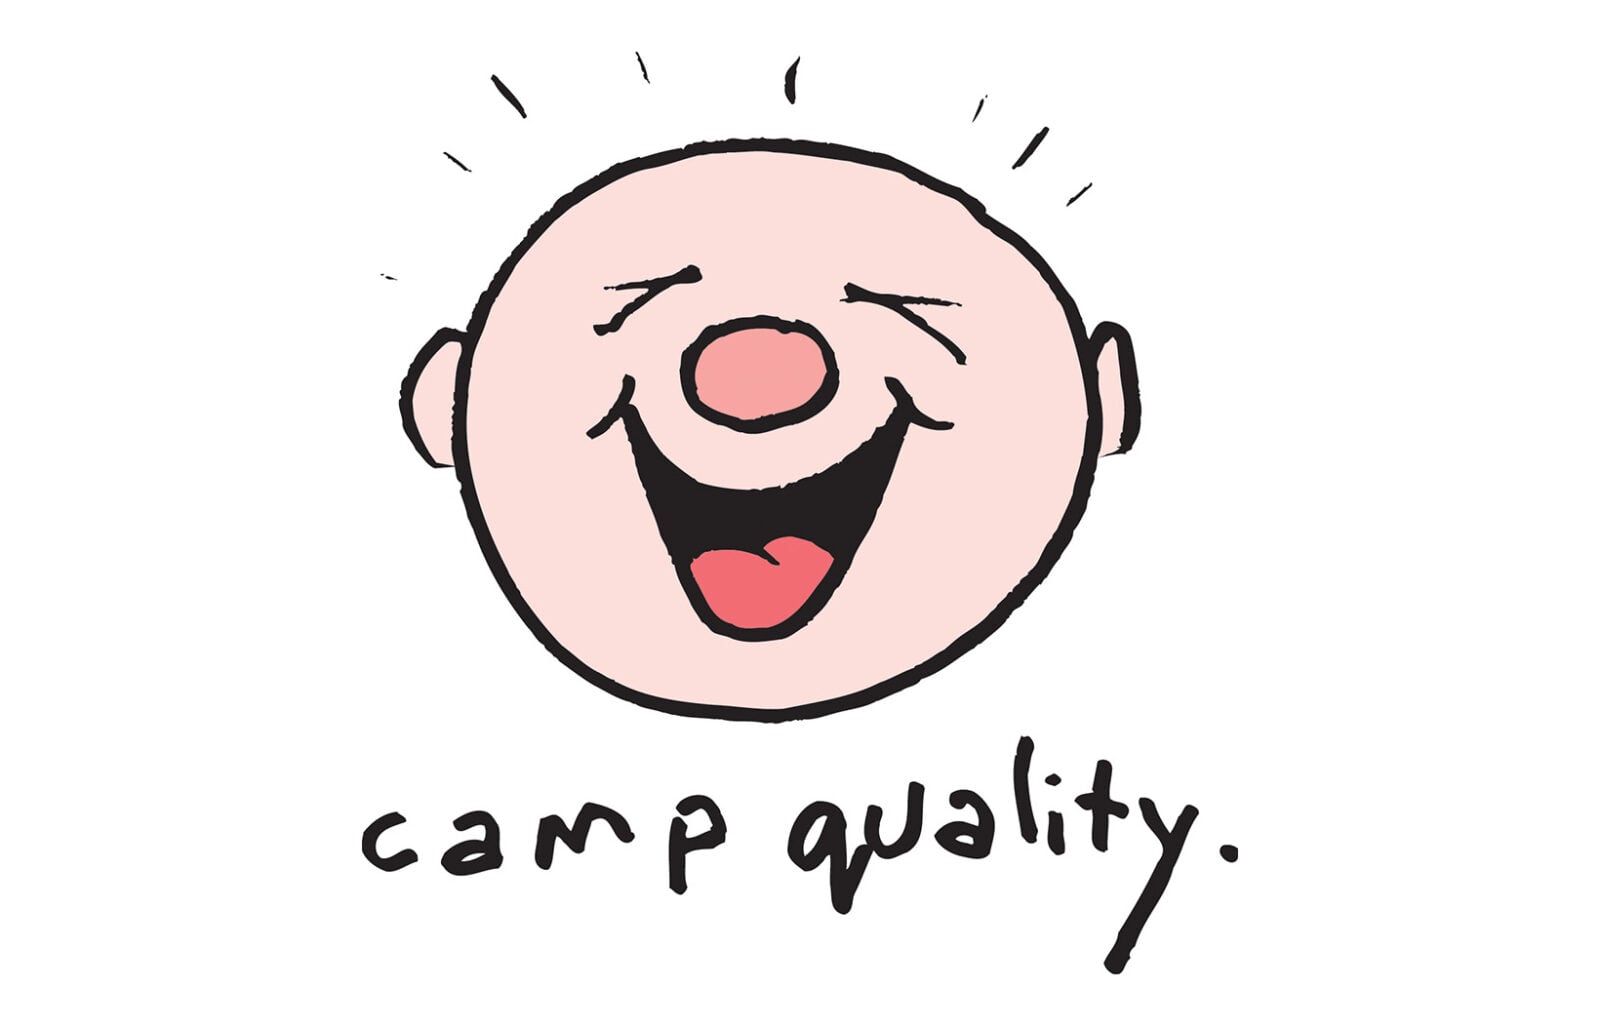 Camp Quality's old Giggle logo from 2002